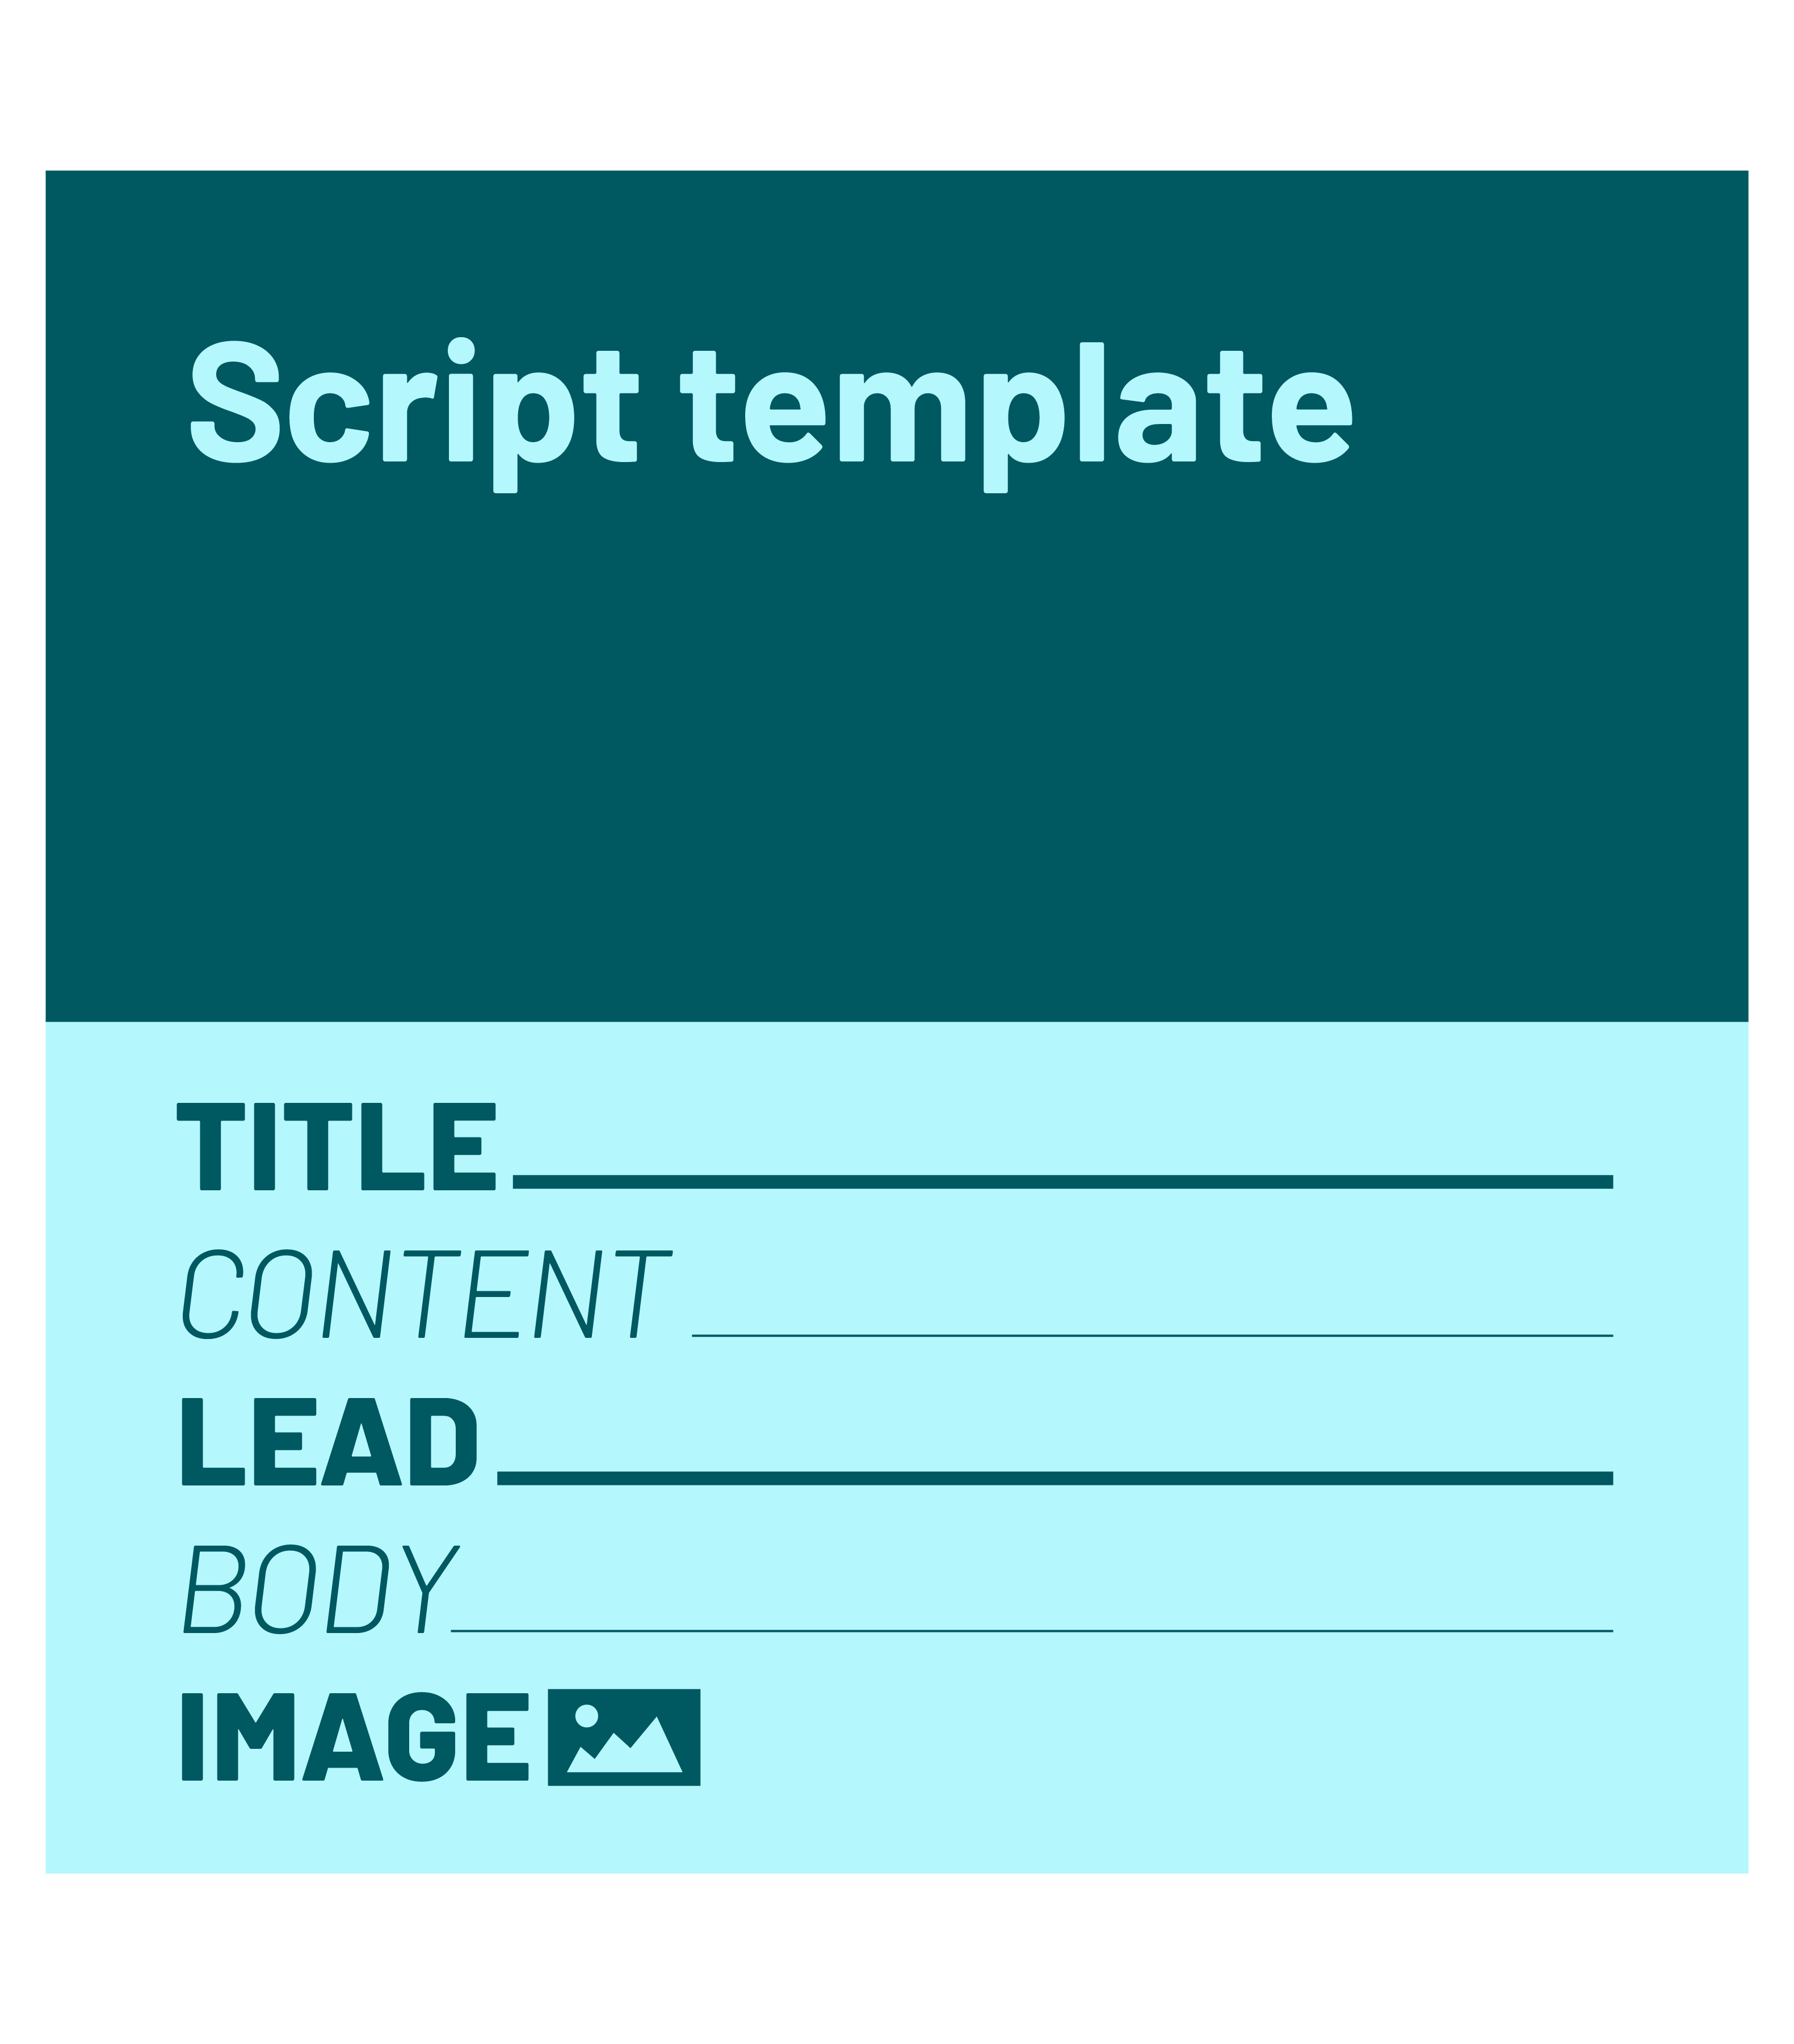 Text and graphic of Script template